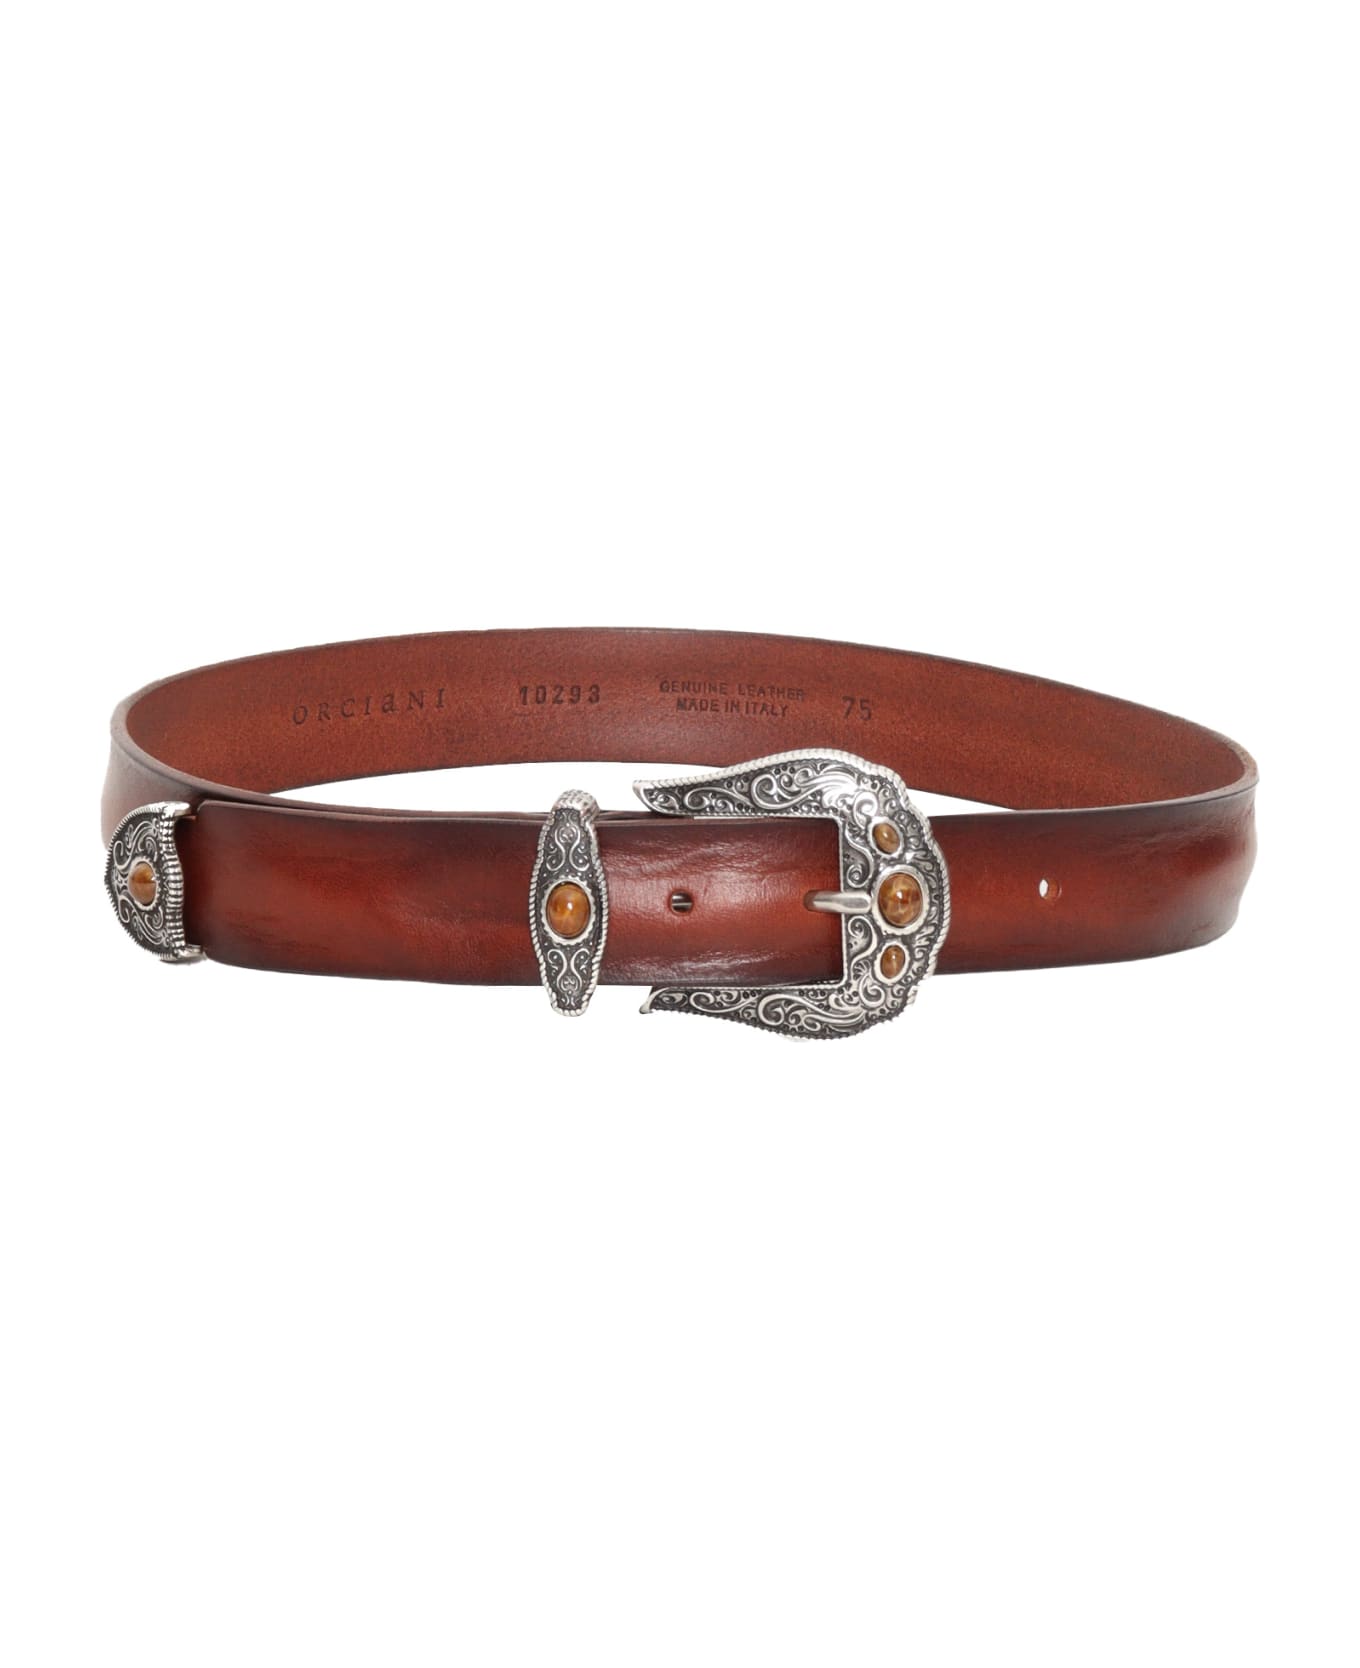 Orciani Texan Style Belt - BROWN